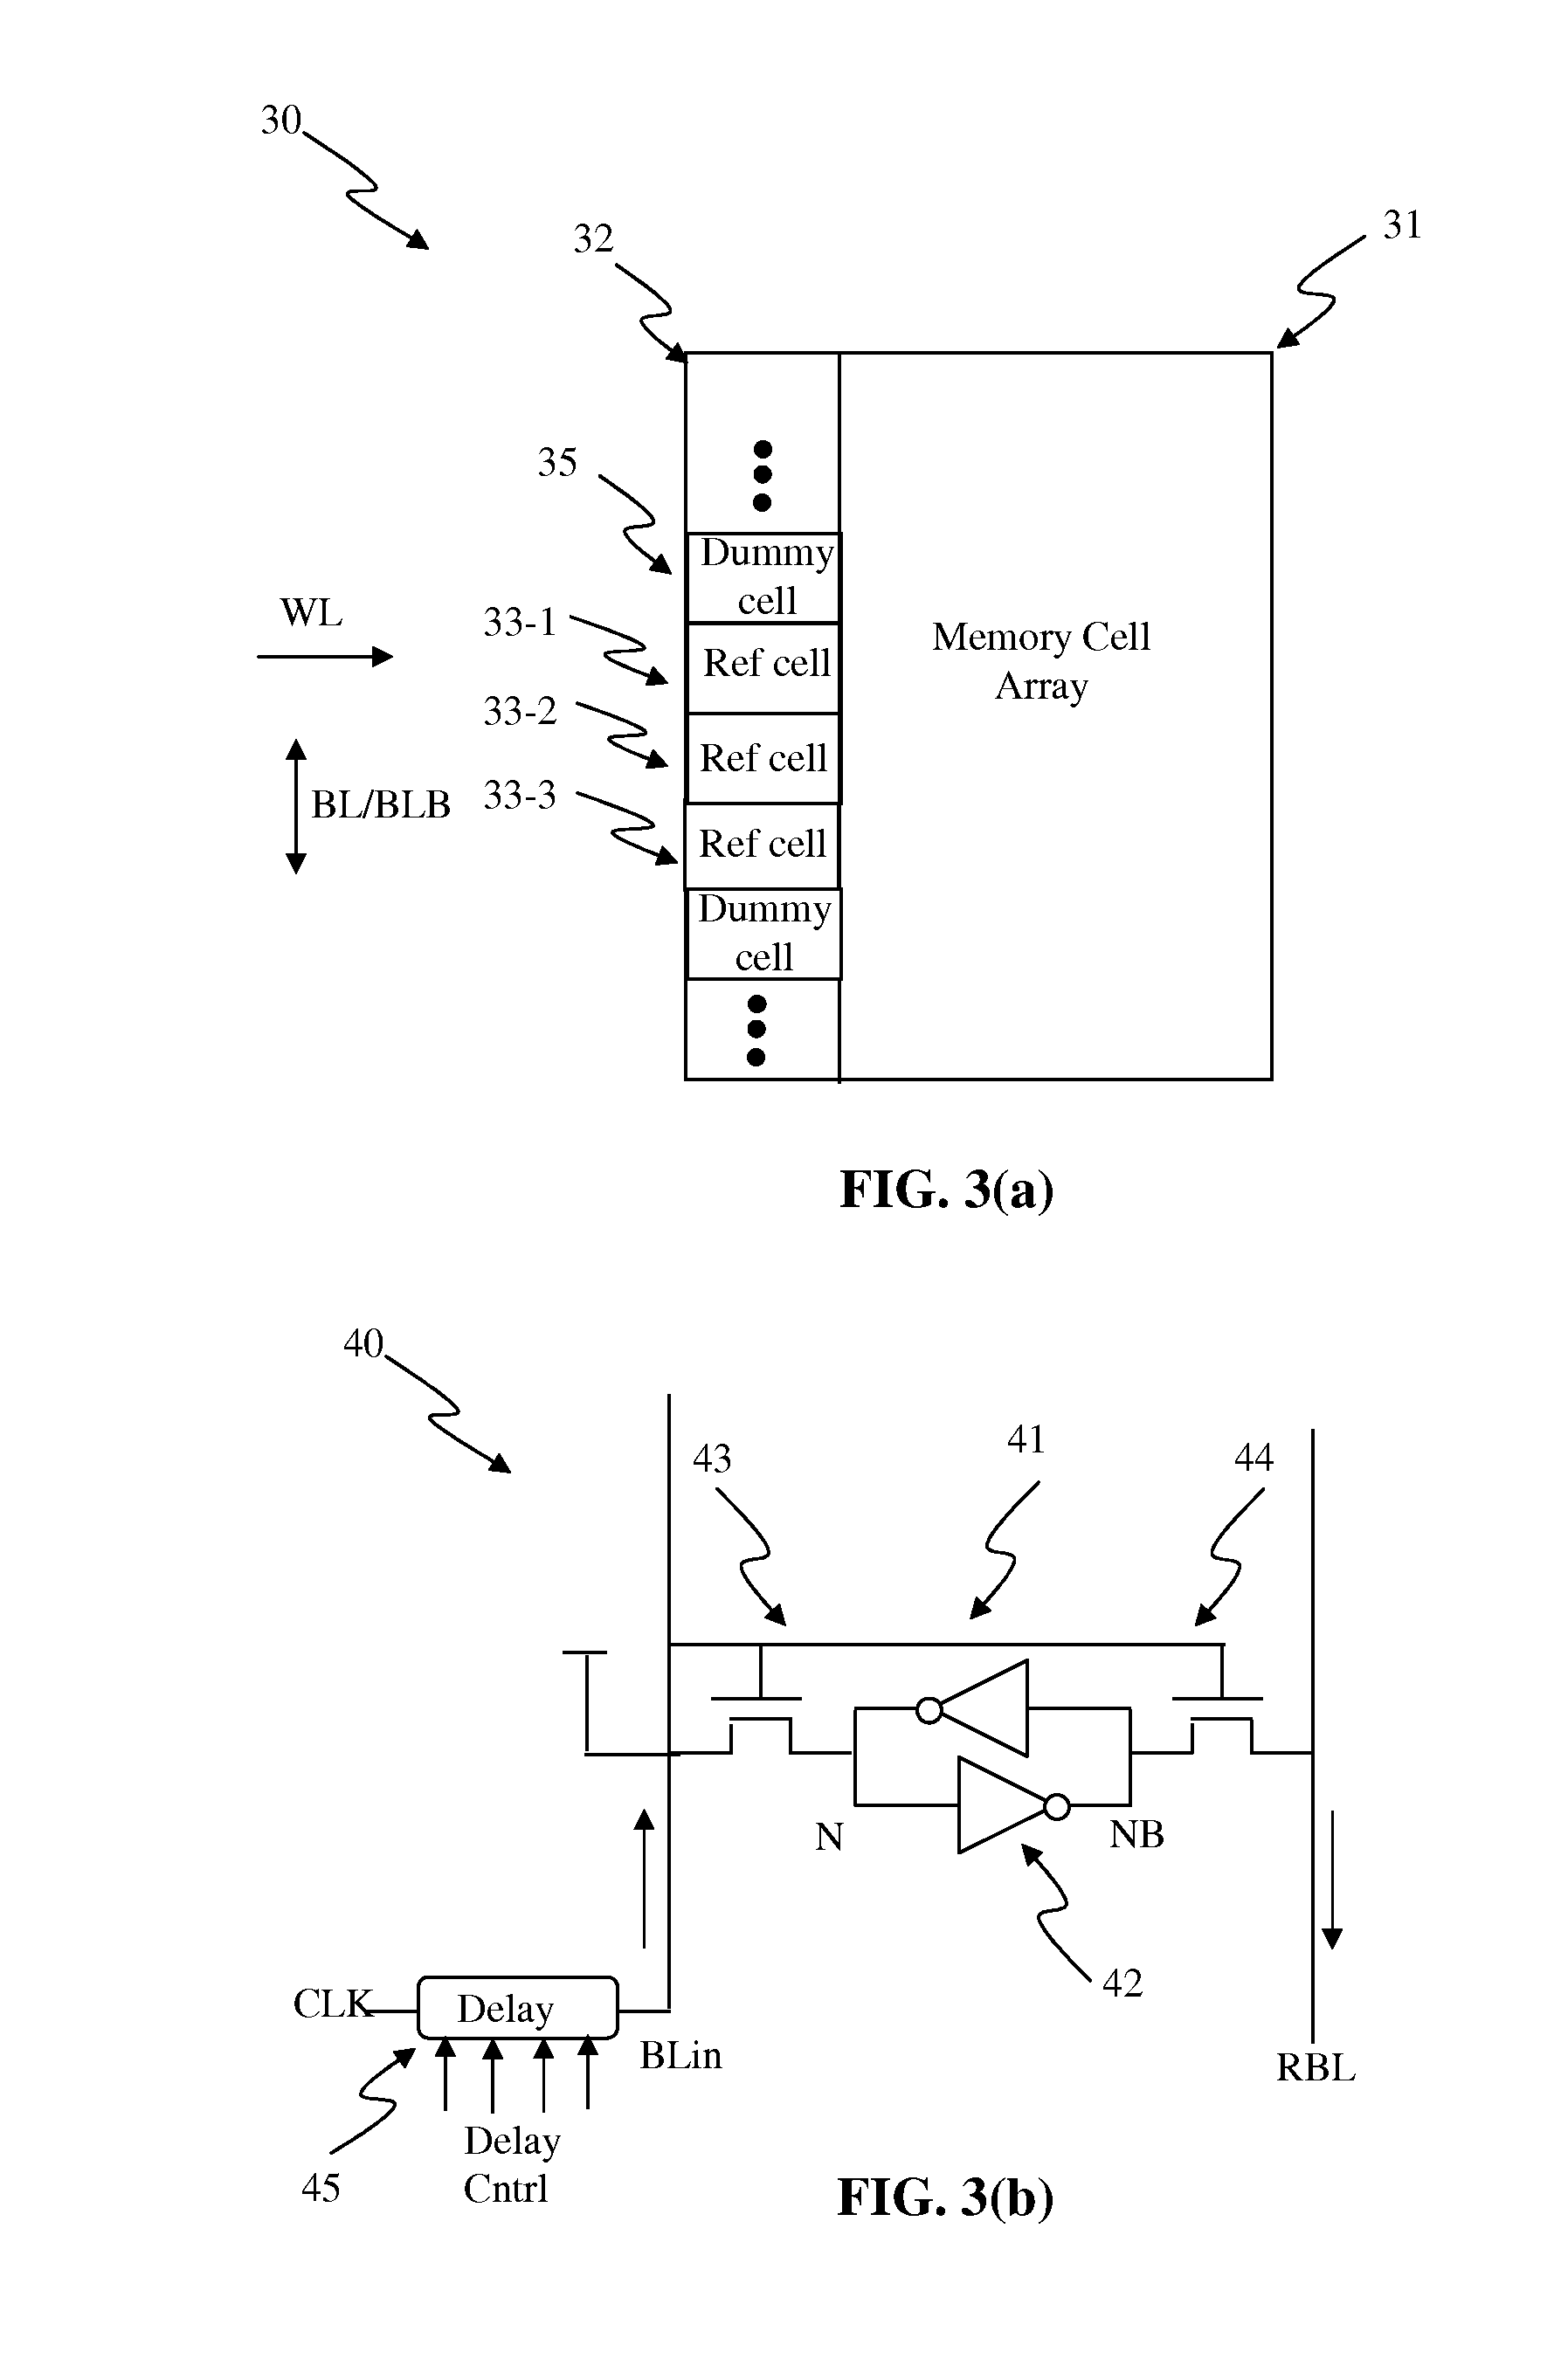 Circuits and Methods of a Self-Timed High Speed SRAM